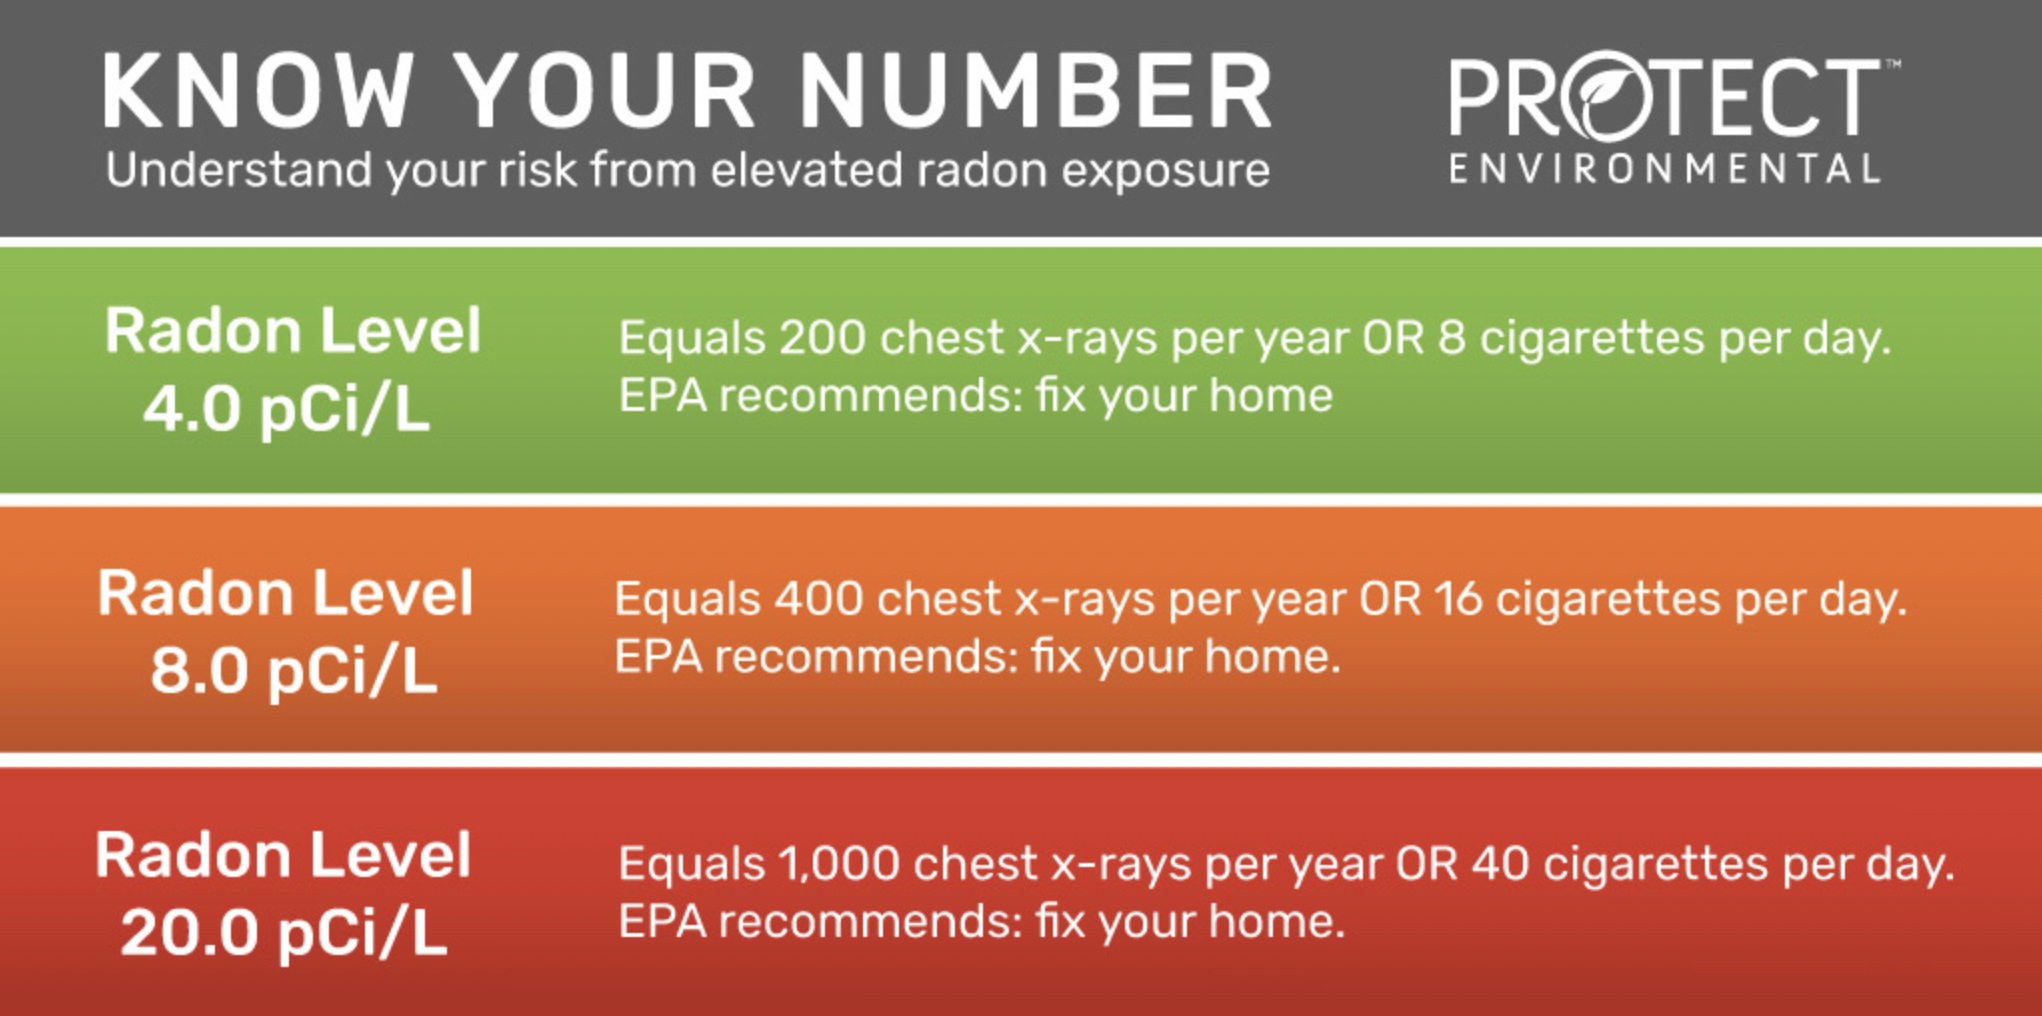 Know Your Number - How does radon exposure compare to x-rays and smoking cigarettes?